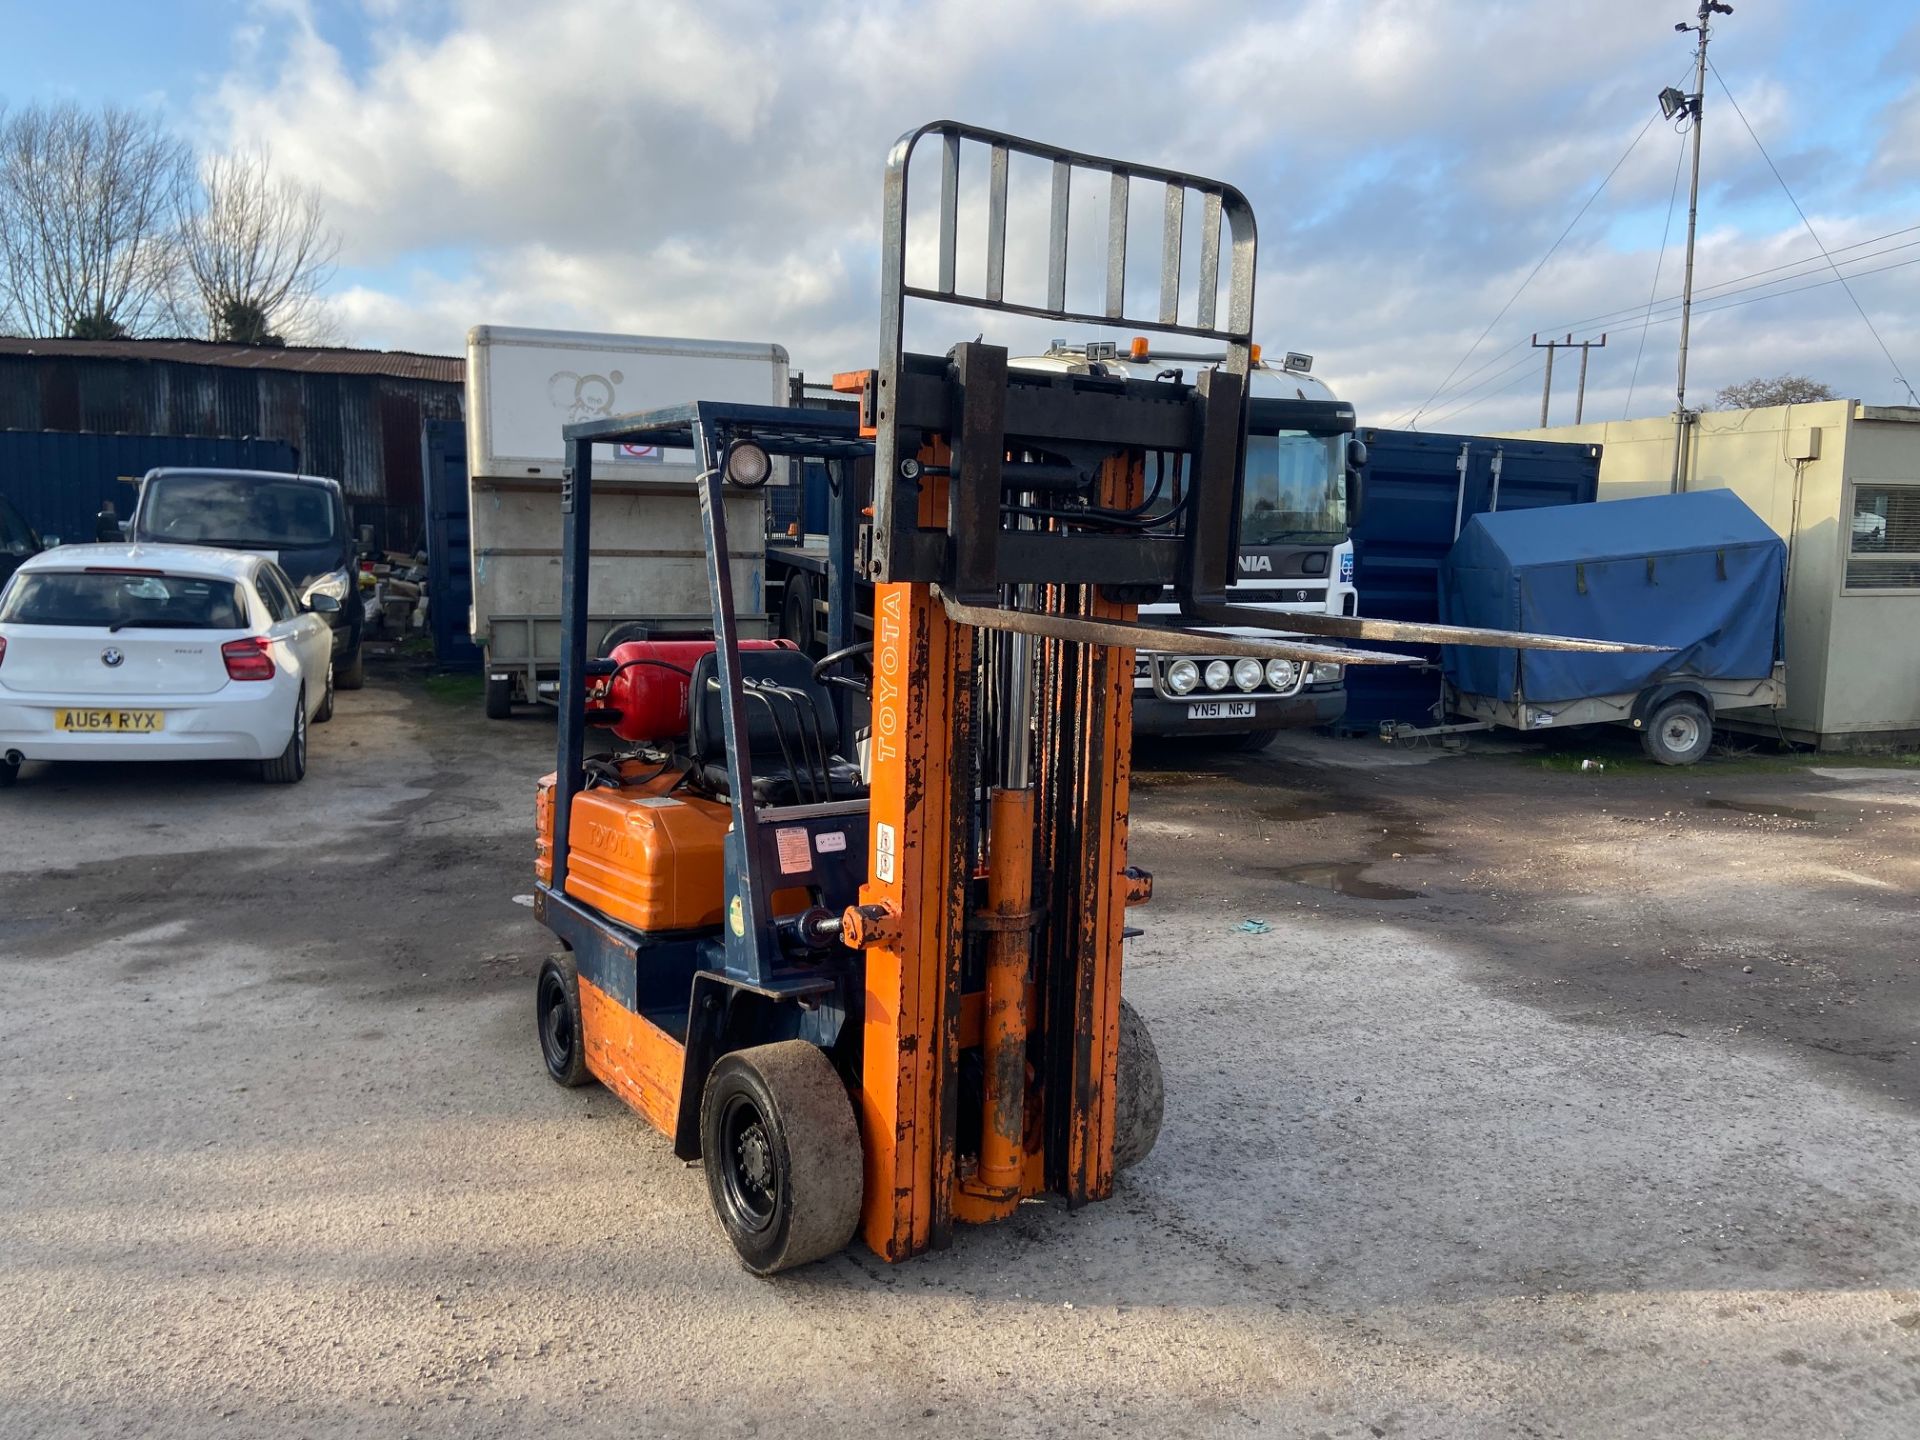 TOYOTA 1.5 TON GAS FORKLIFT, ALL OPERATIONAL, SIDE SHIFT, TIDY LITTLE TRUCK, GAS BOTTLE NOT INCLUDED - Image 5 of 5